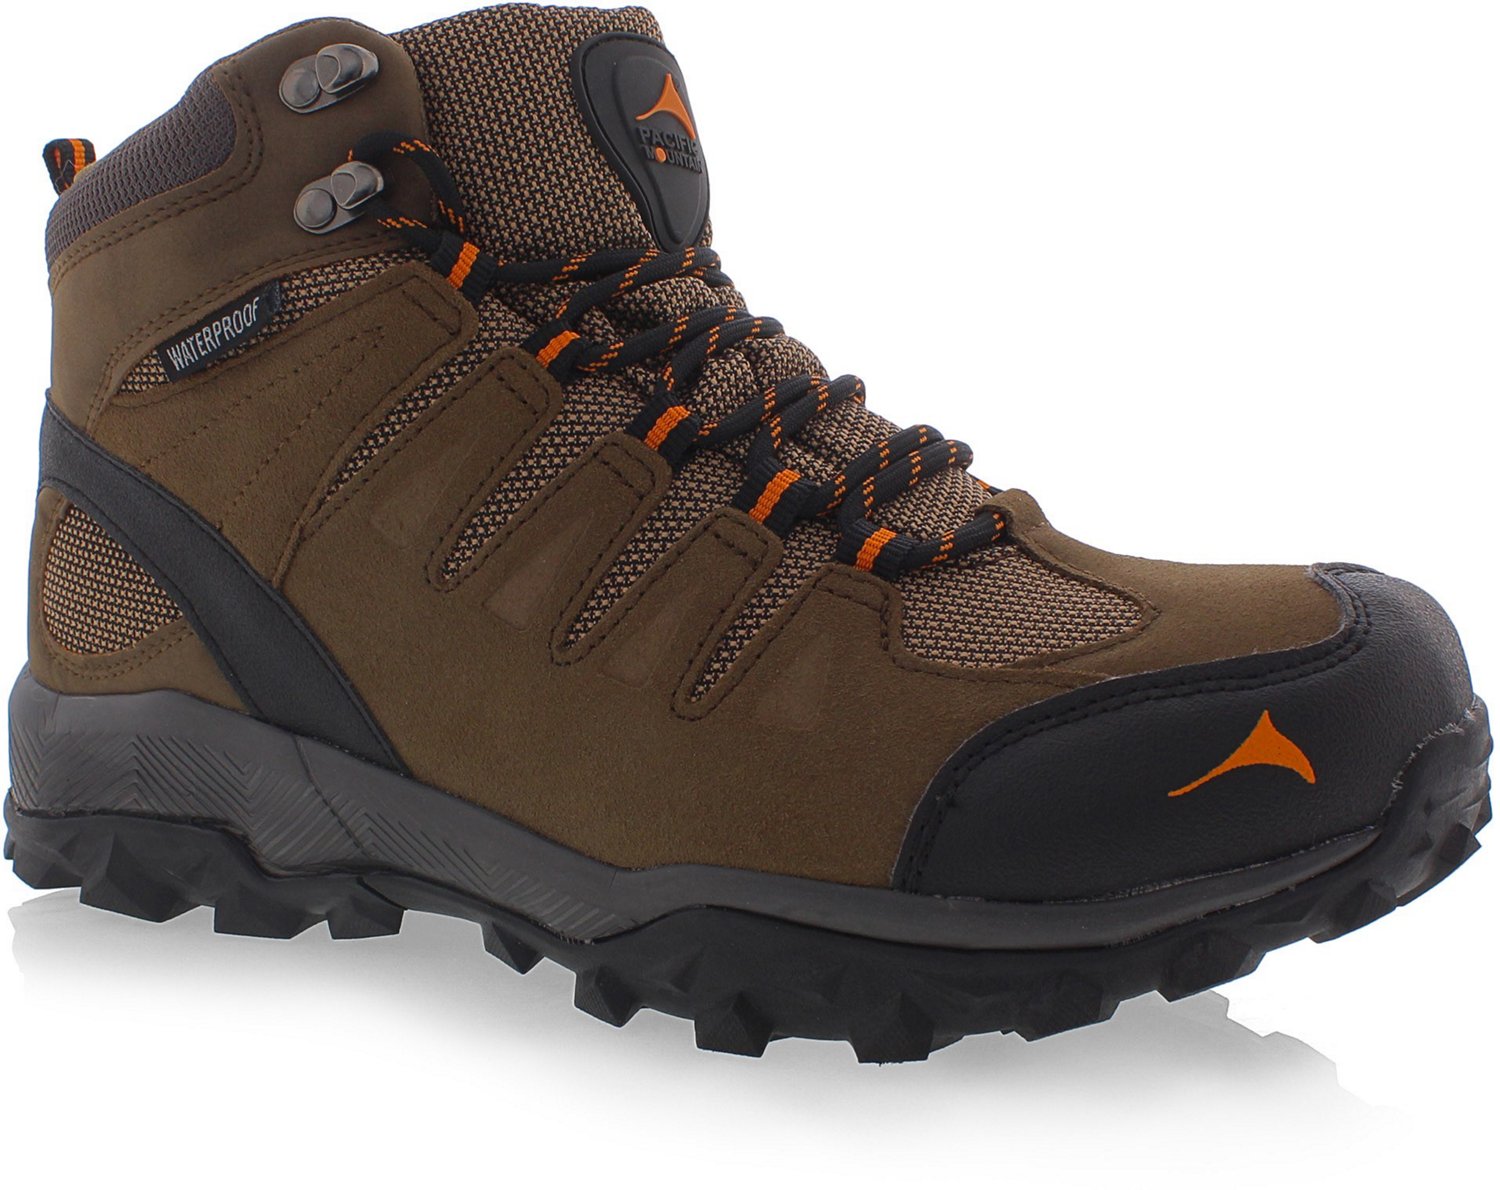 Pacific Mountain Mens Boulder Mid Waterproof Hiking Boots